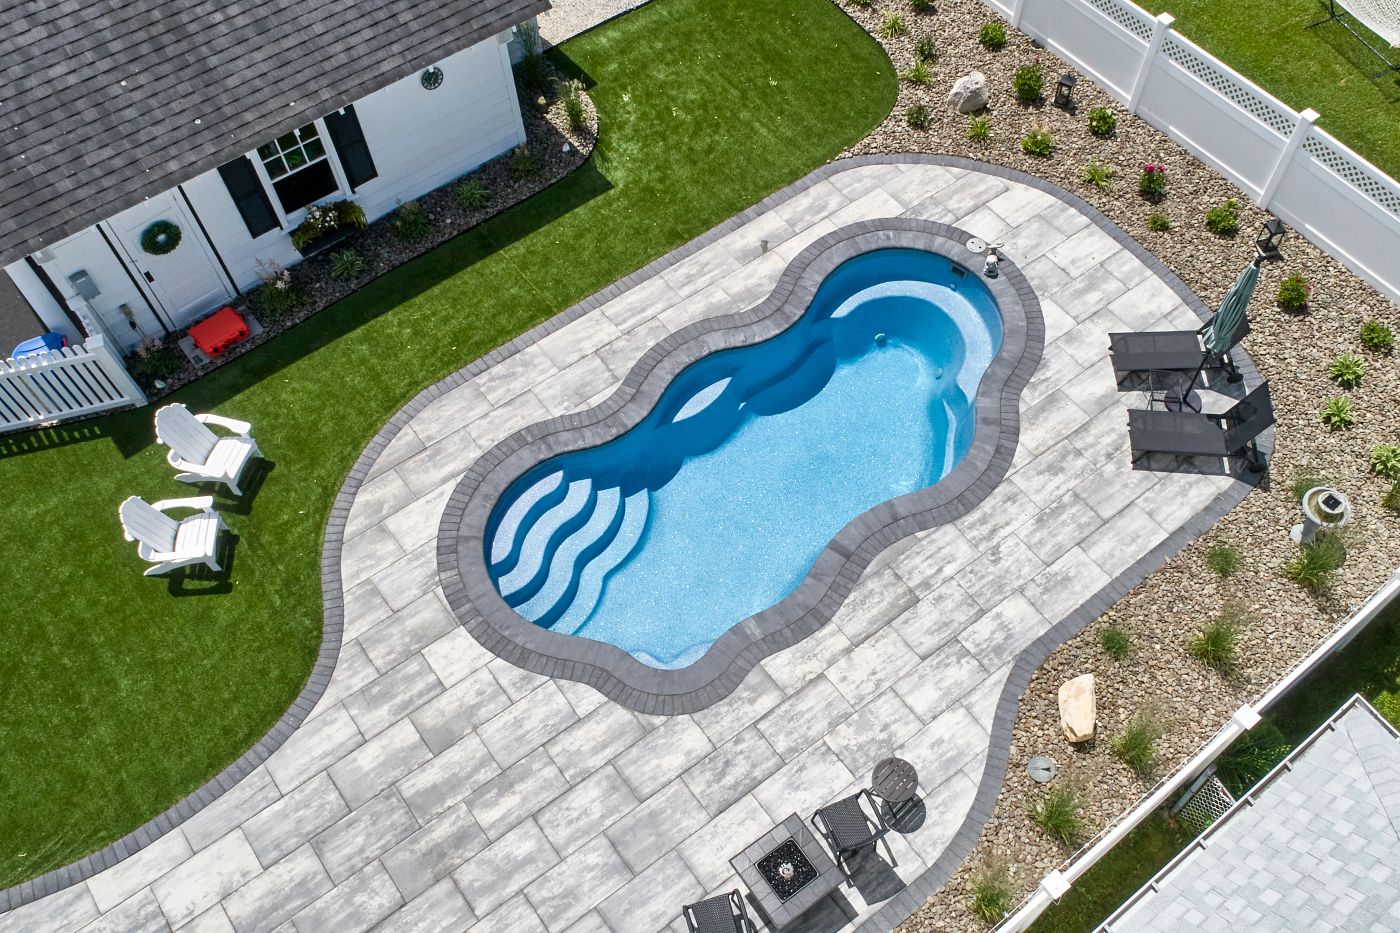 freeform fiberglass pool in small backyard with shed and patio furniture